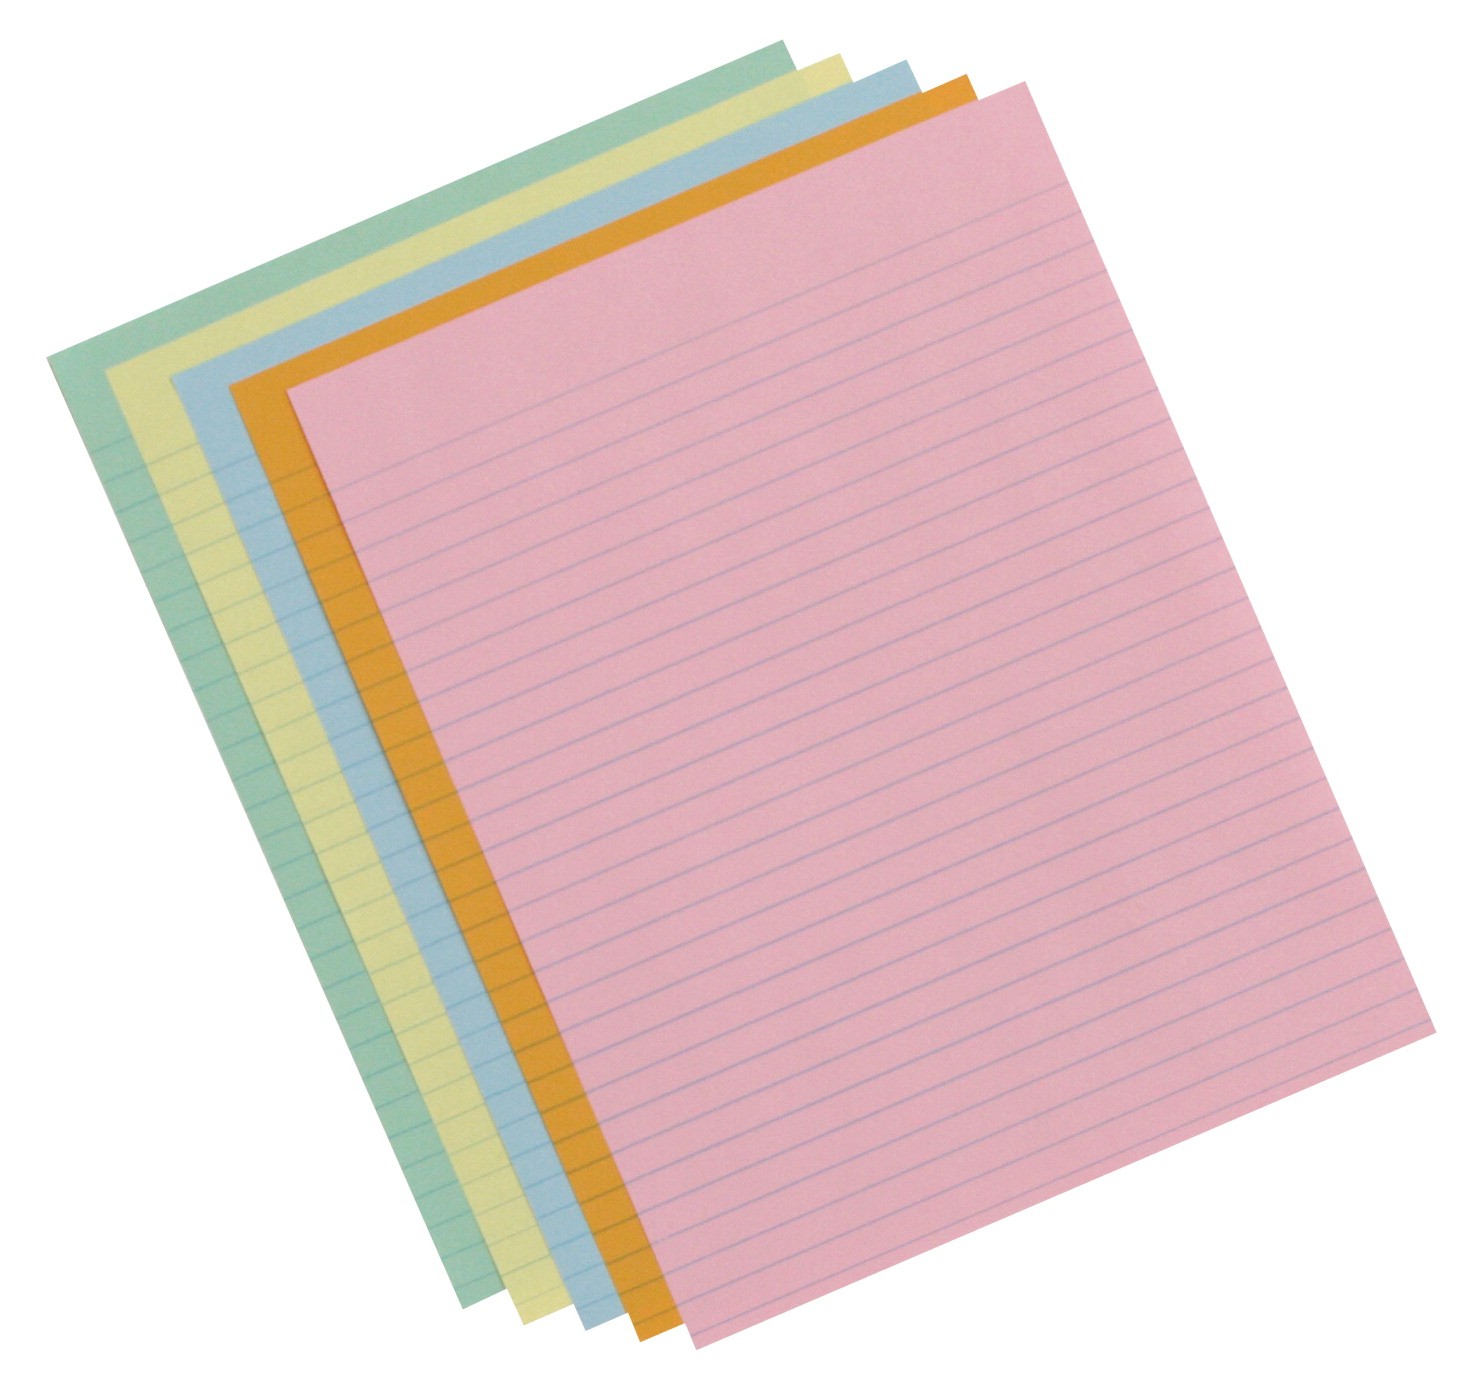 8-1/2 X 11 Inch, 20 lb, Ruled Exhibit Paper Assortment, Assorted Color, 500/Ream